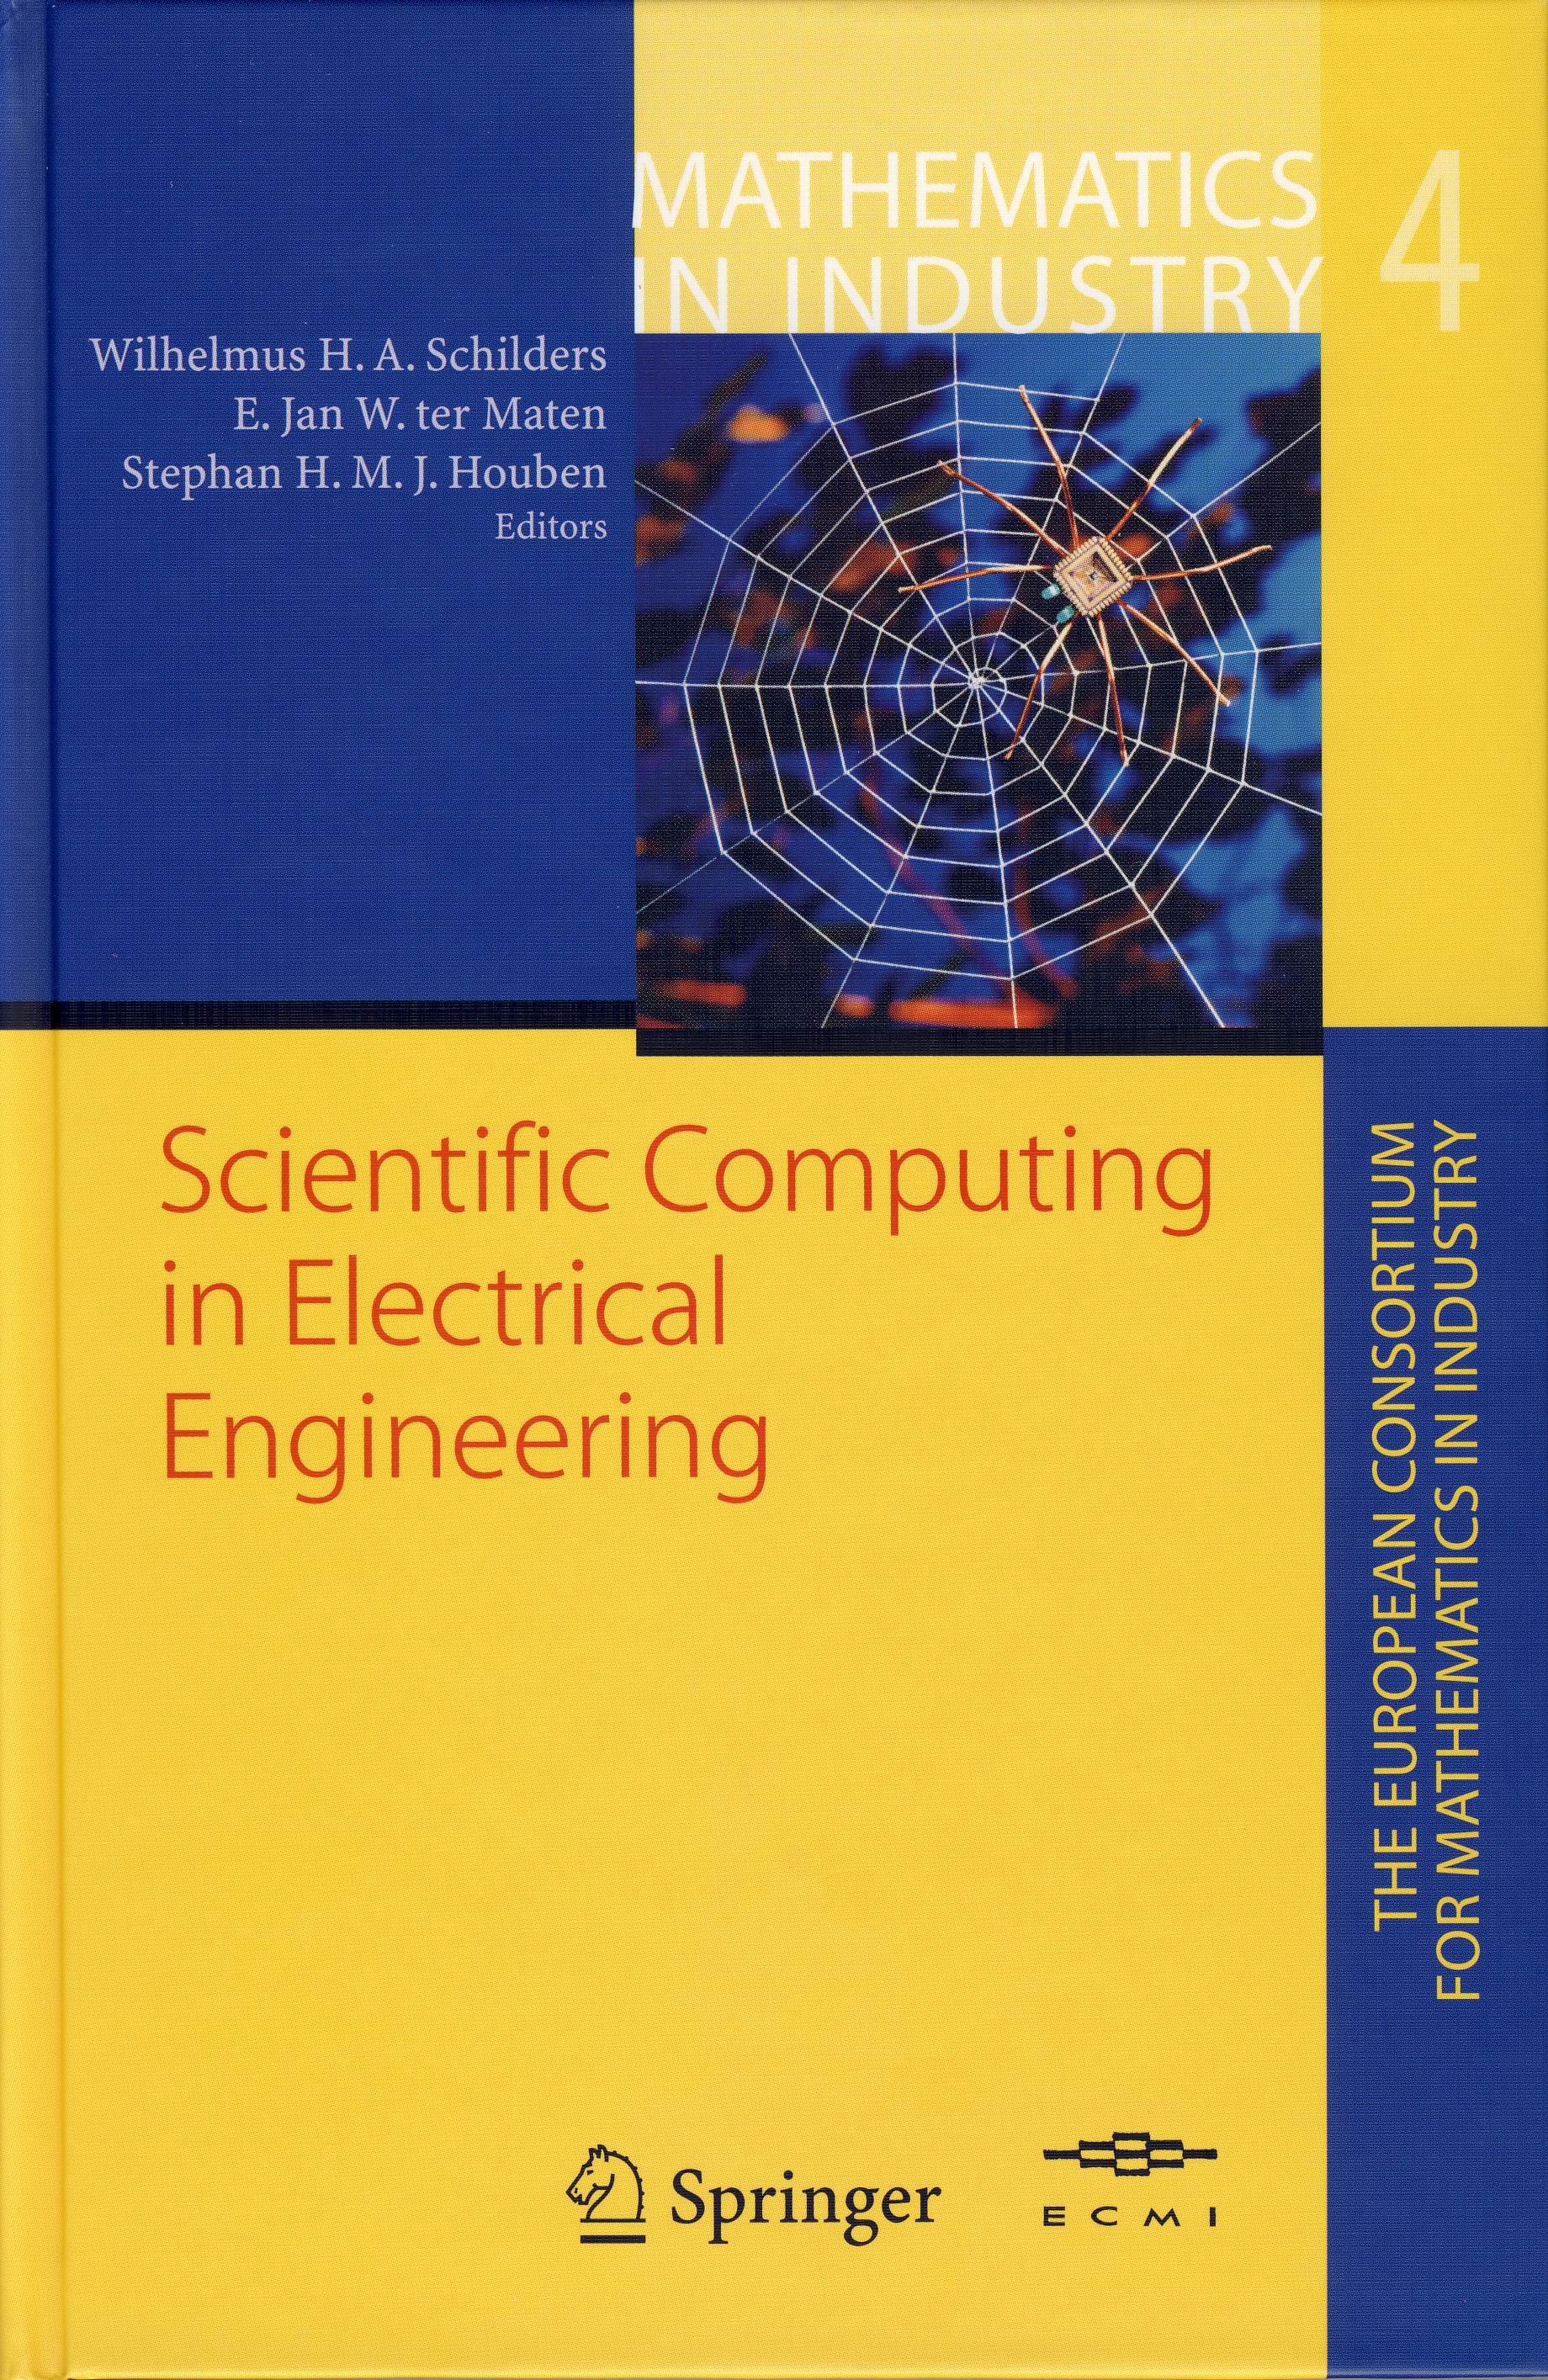 'Scientific Computing in Electrical Engineering' book cover